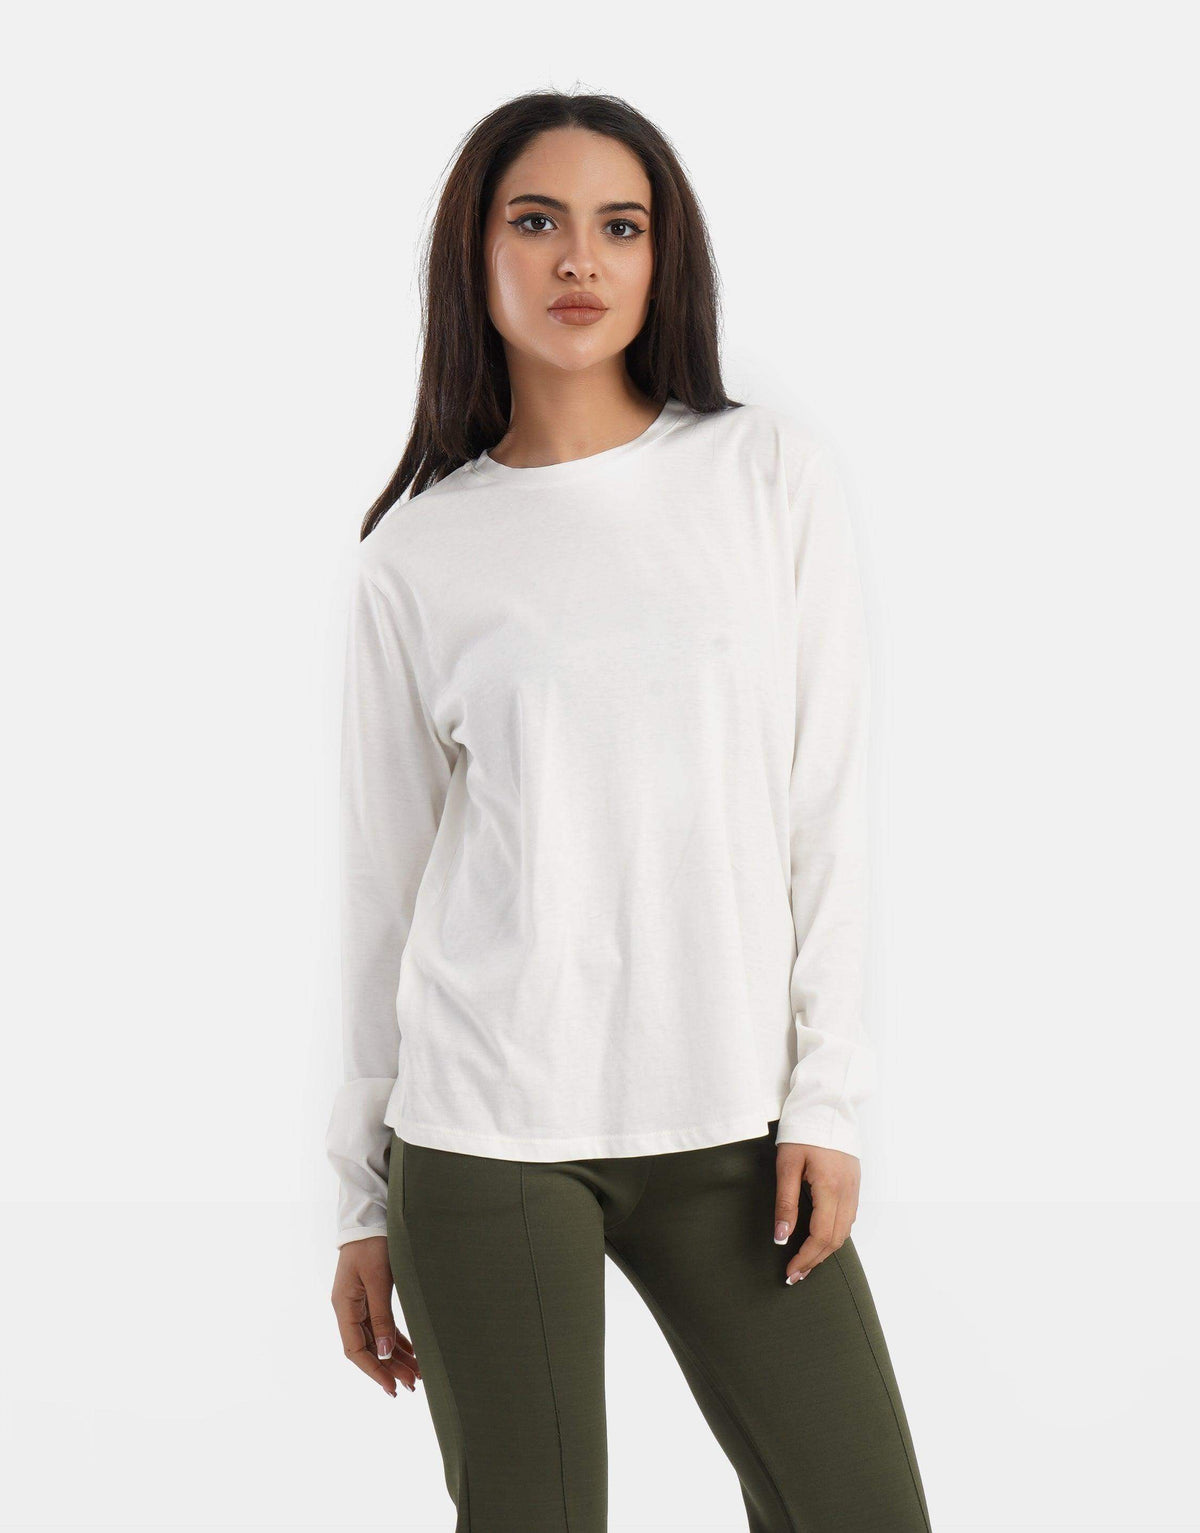 Relaxed Fit Long Sleeves T-shirt - Carina - كارينا